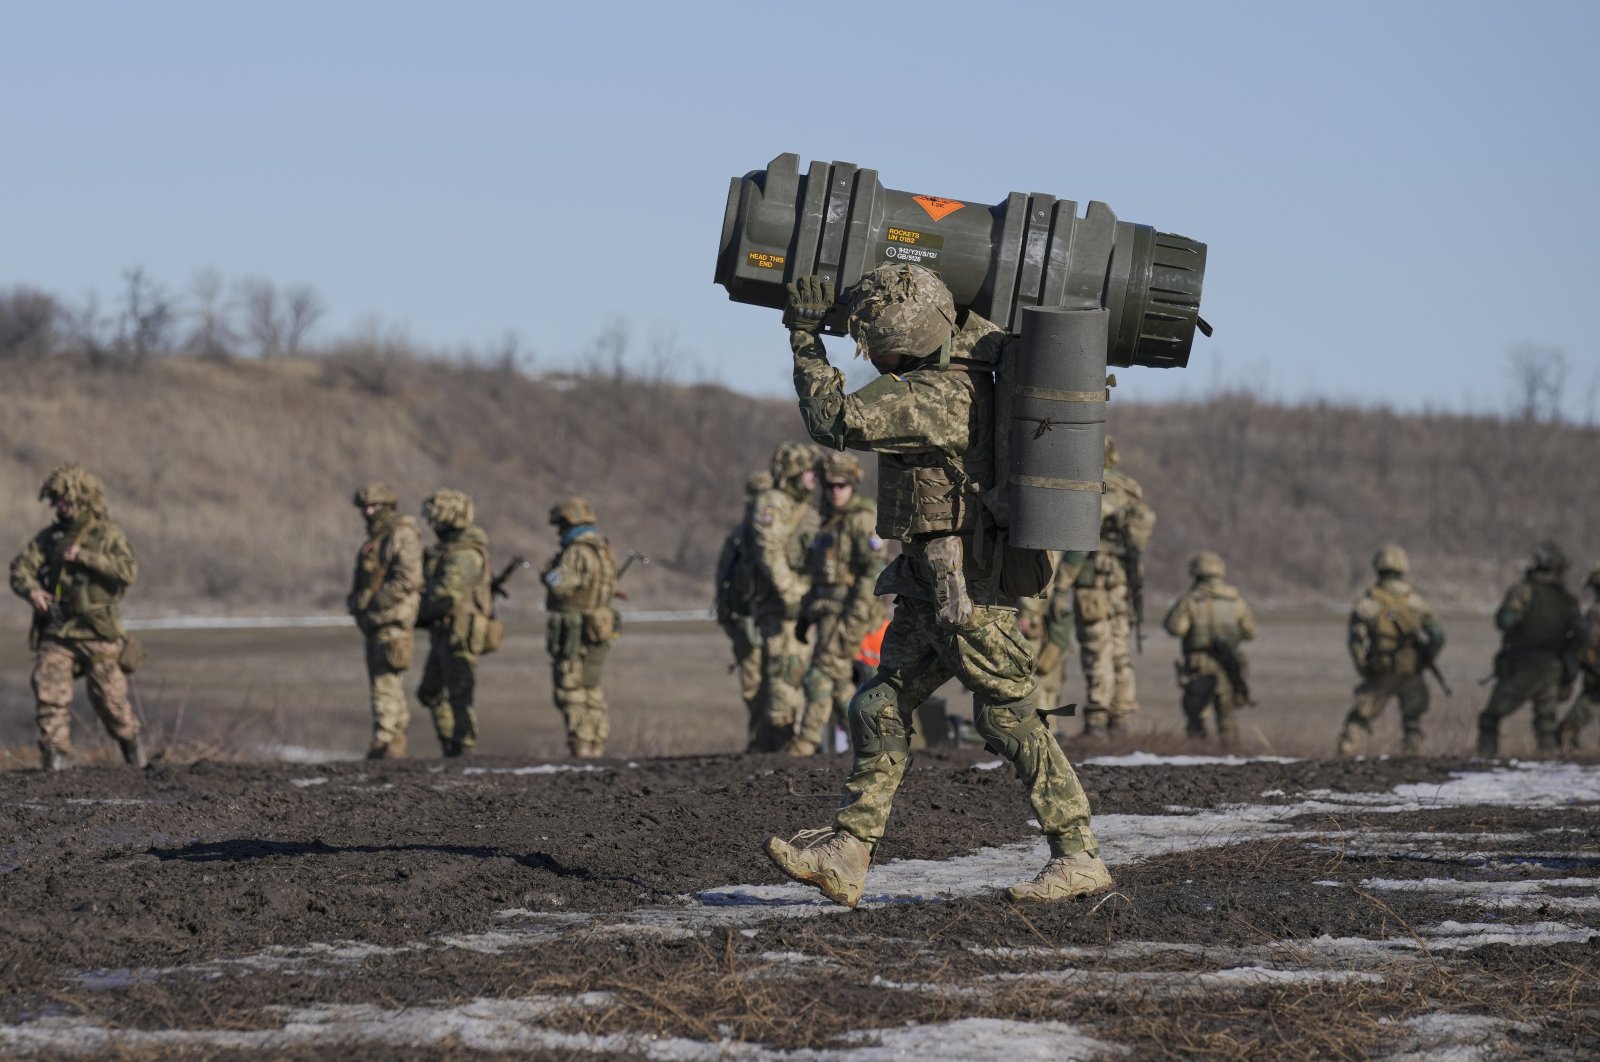 A Ukrainian serviceman carries an NLAW anti-tank weapon during an exercise in the Joint Forces Operation, in the Donetsk region, eastern Ukraine, Feb. 15, 2022. (AP Photo)